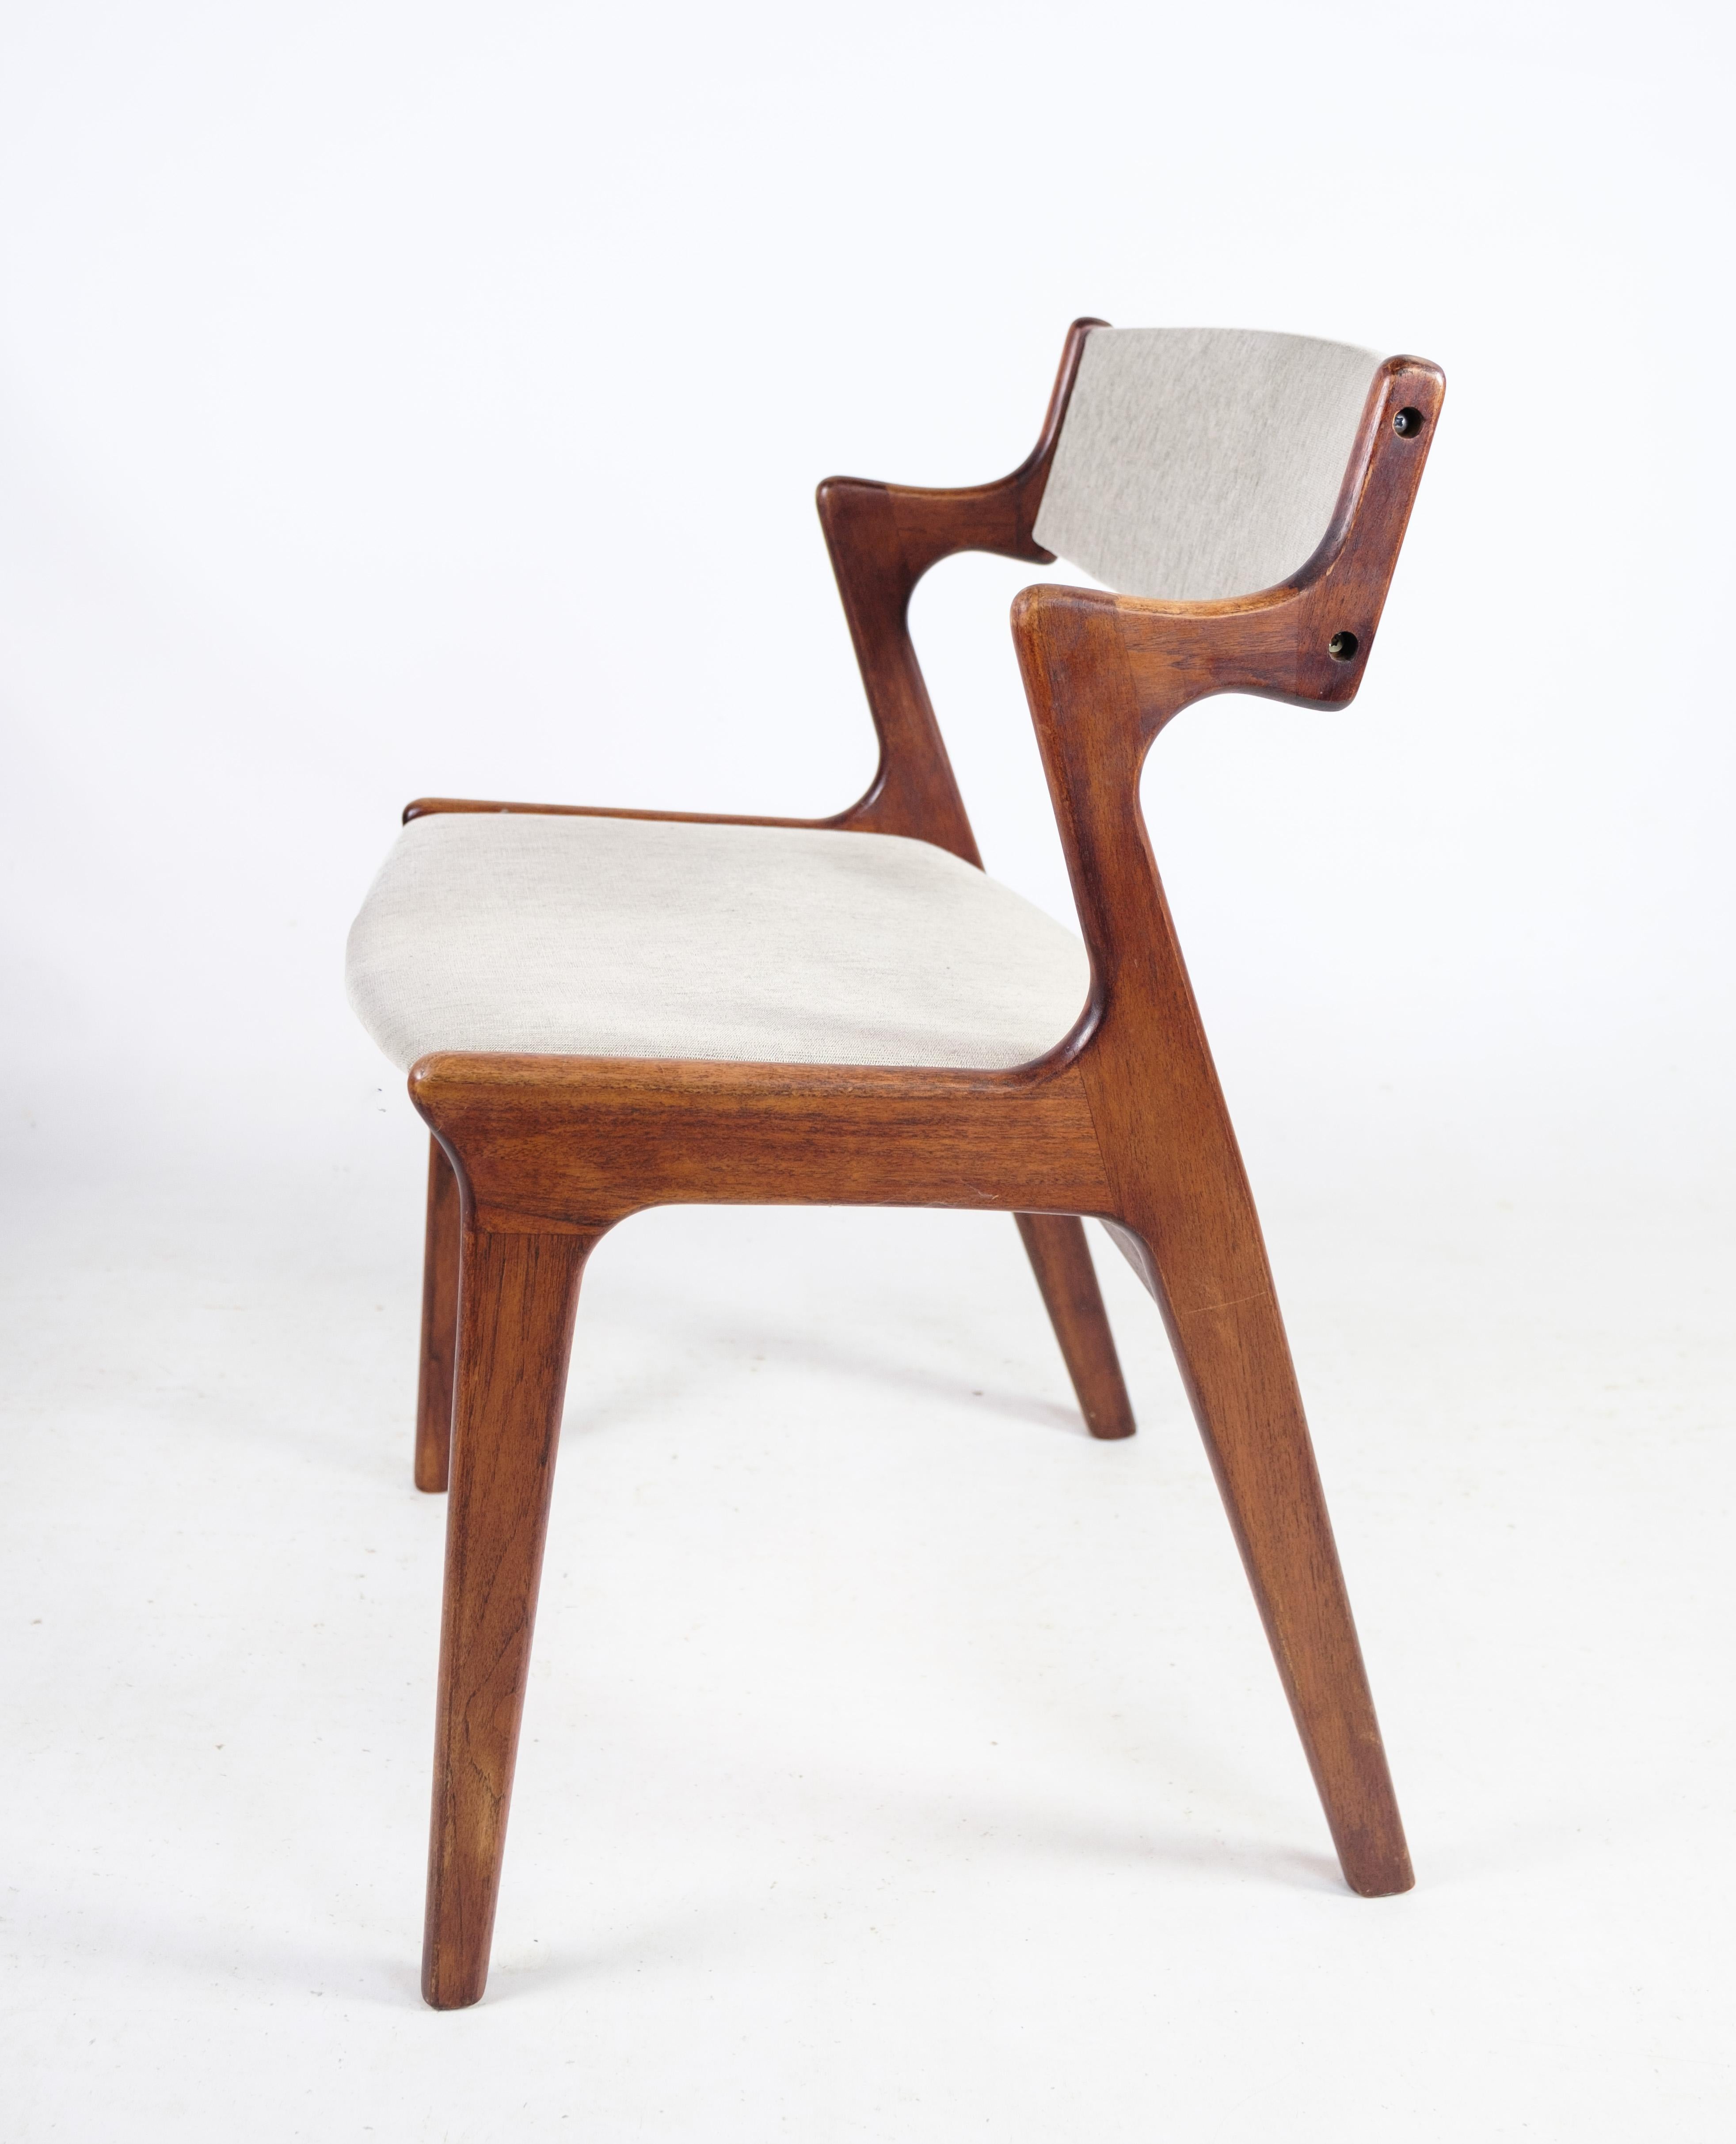 Set of 4 Dining Chairs, Teak, Nova Furniture, 1960s For Sale 10